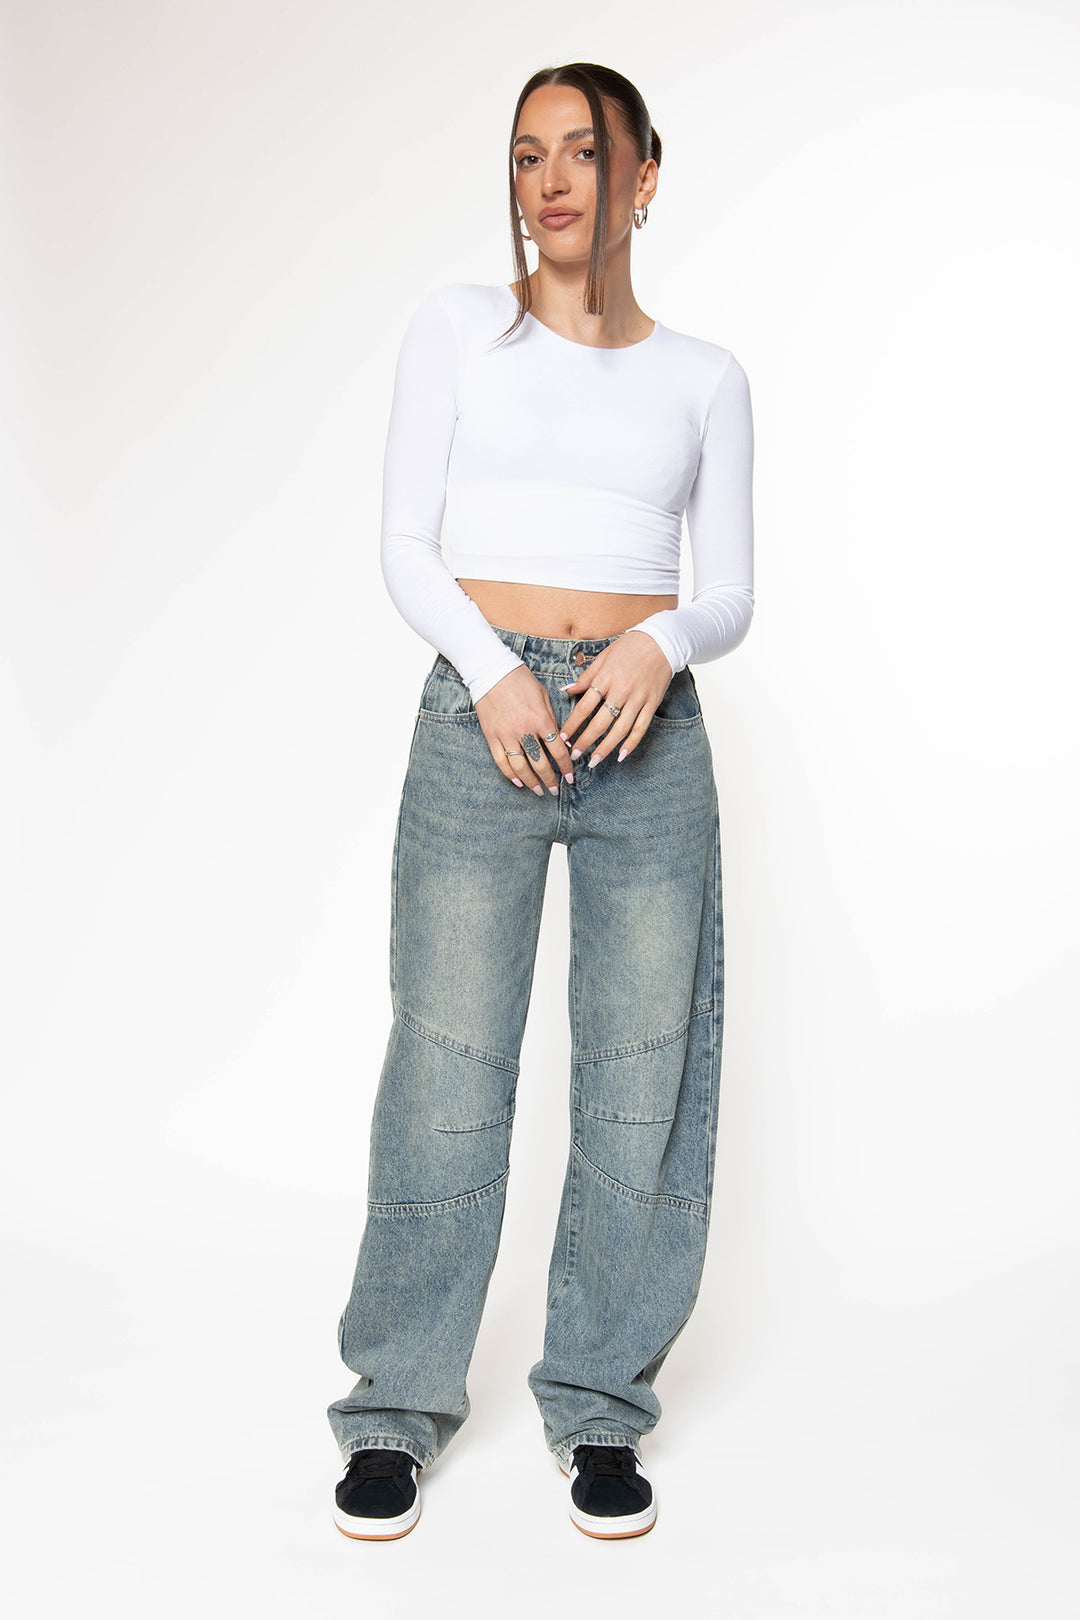 Lessi Lined Straight Leg Jeans Jeans Routines Fashion   